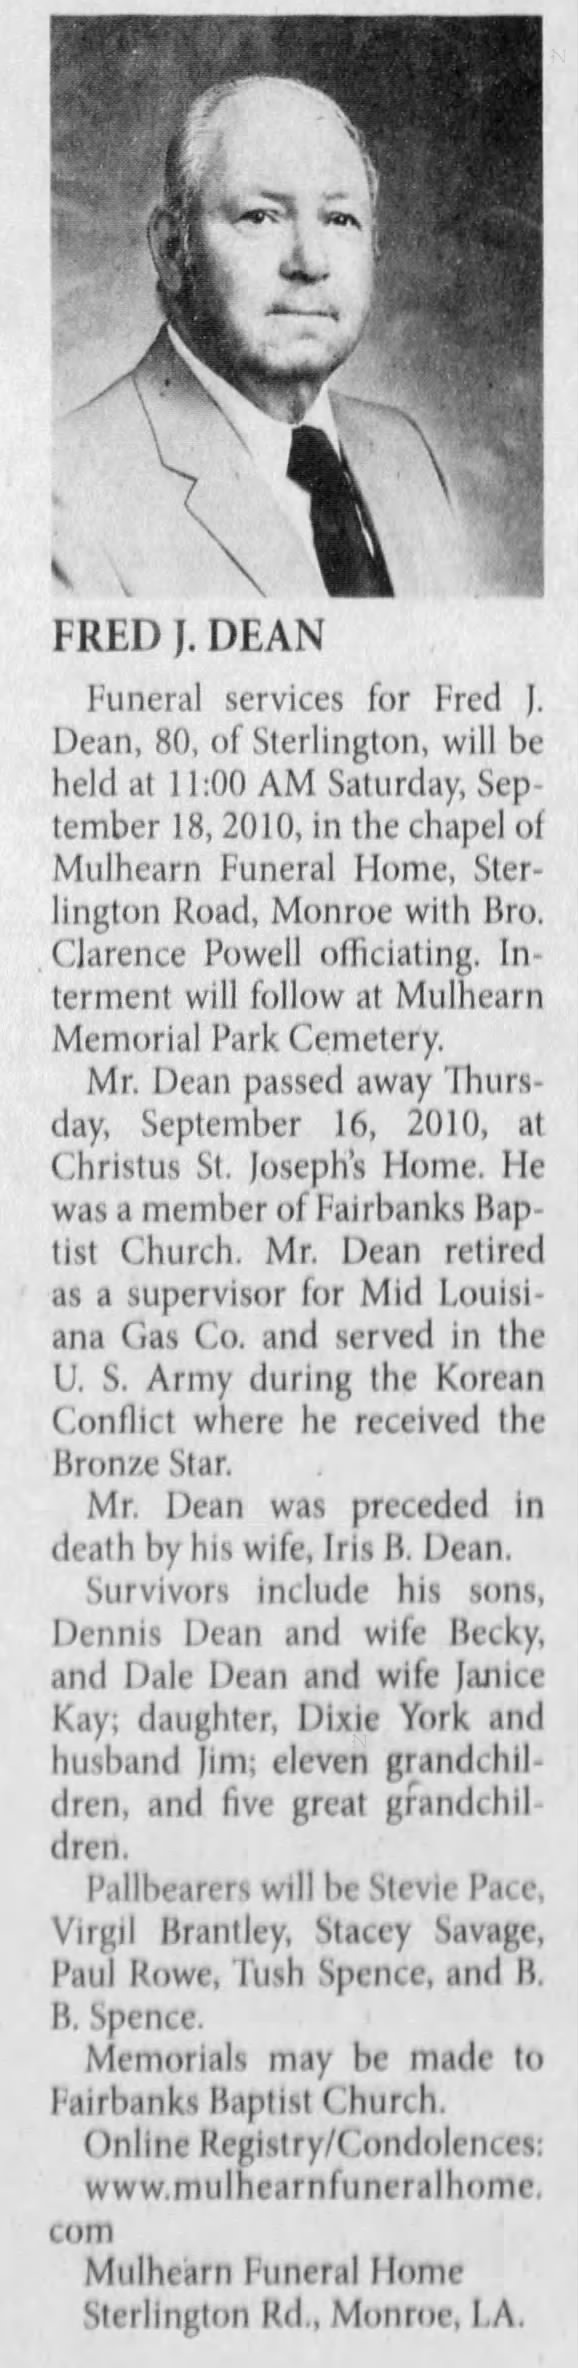 Obituary for Fred J. Dean